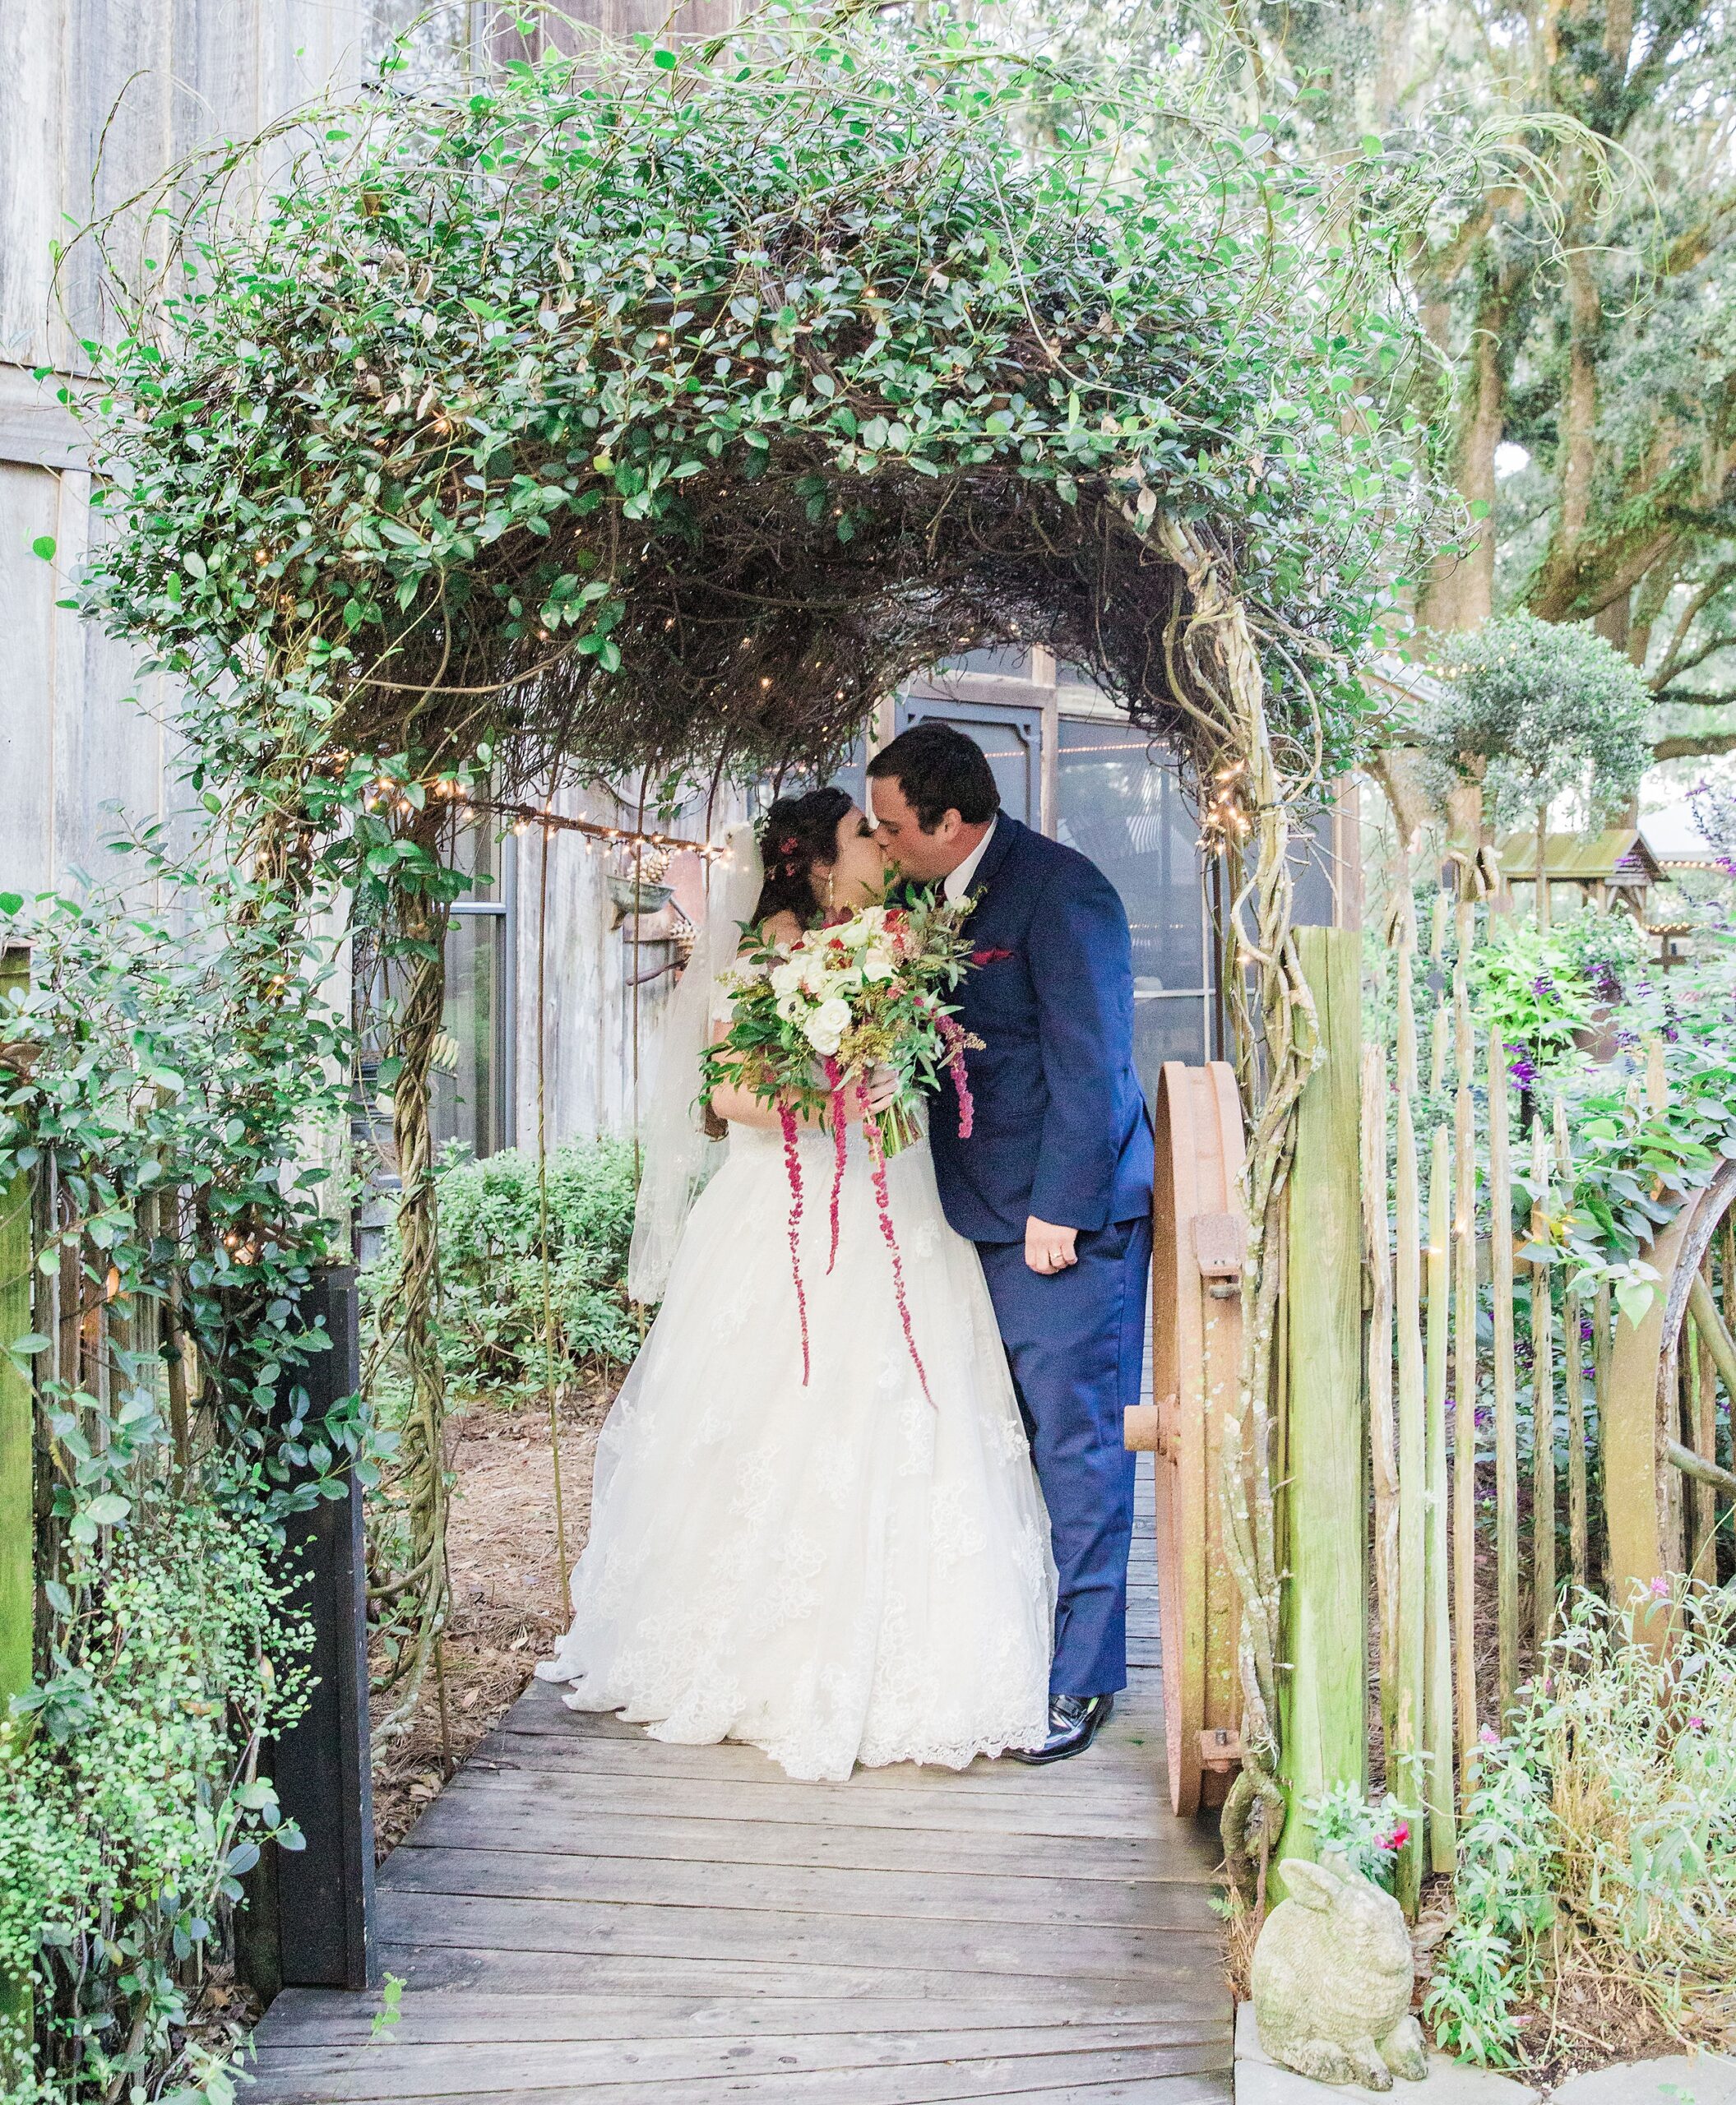 Newlyweds kiss under a vine covered archway strung with strig lights